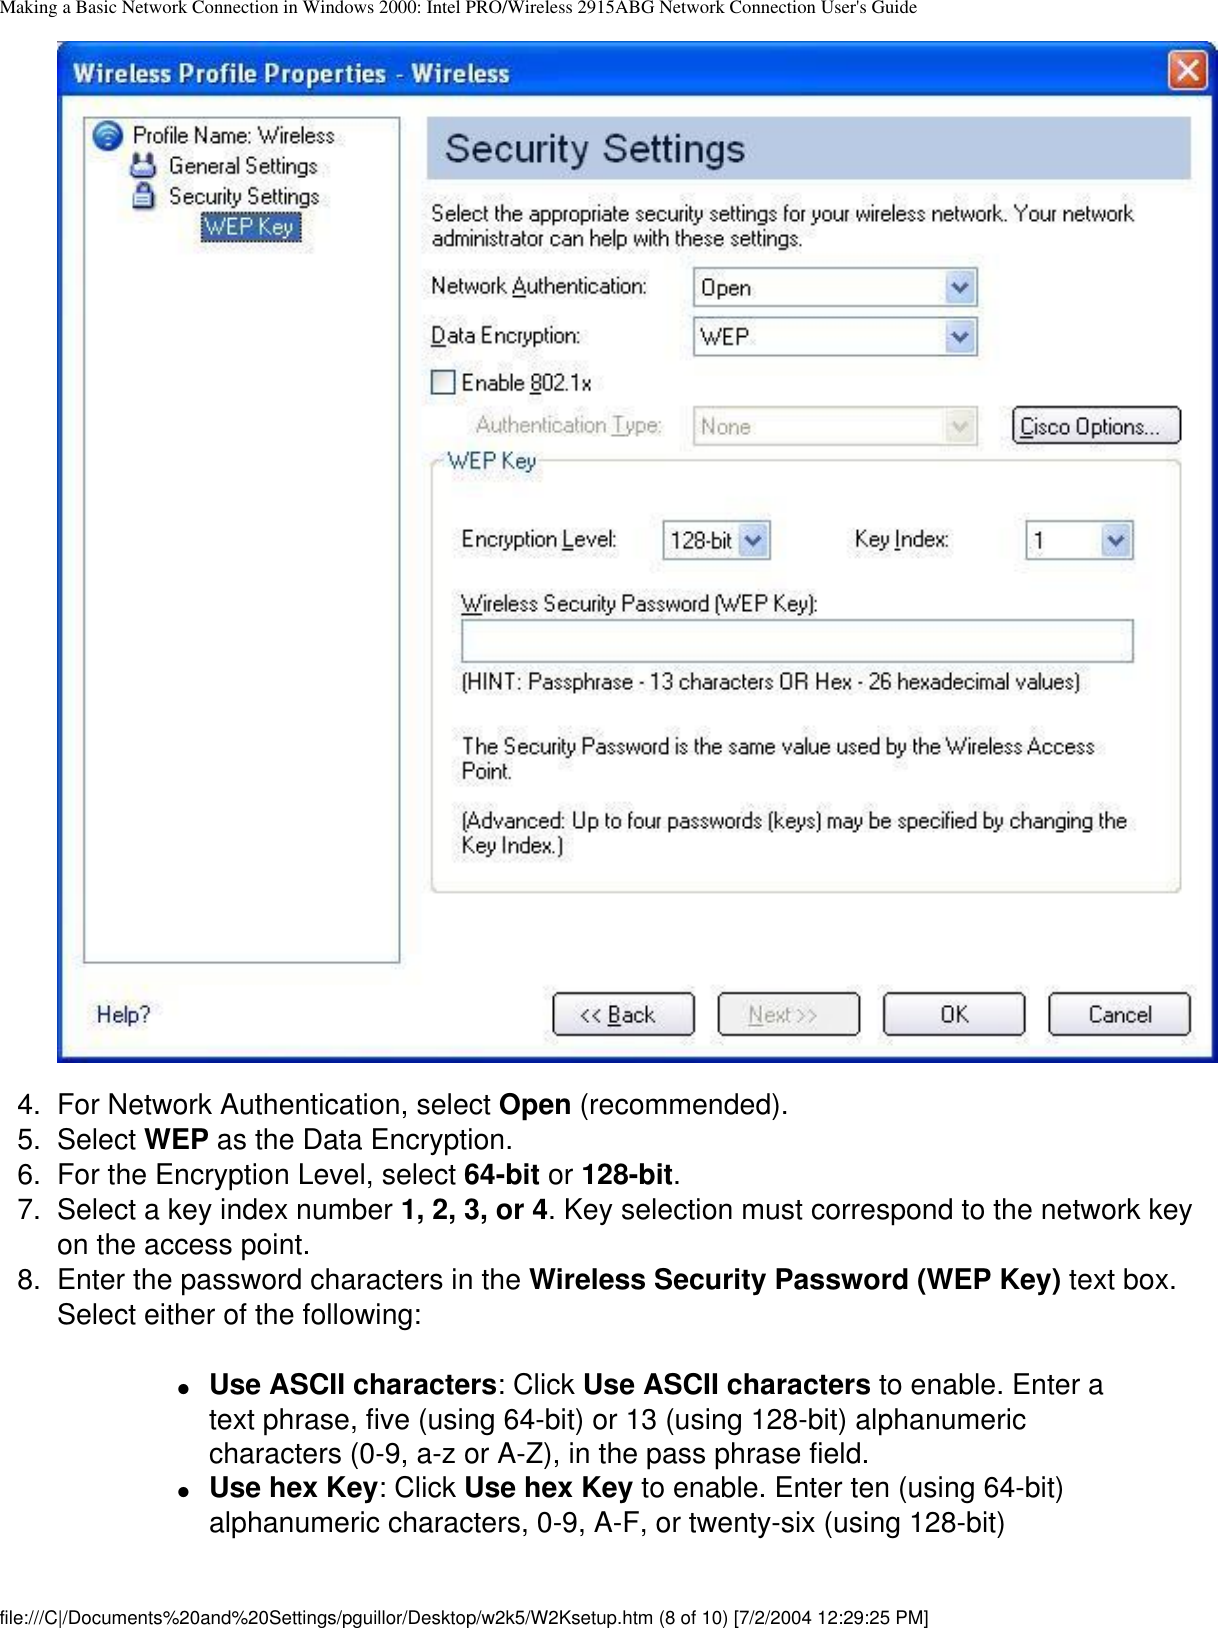 Making a Basic Network Connection in Windows 2000: Intel PRO/Wireless 2915ABG Network Connection User&apos;s Guide4.  For Network Authentication, select Open (recommended).5.  Select WEP as the Data Encryption. 6.  For the Encryption Level, select 64-bit or 128-bit. 7.  Select a key index number 1, 2, 3, or 4. Key selection must correspond to the network key on the access point. 8.  Enter the password characters in the Wireless Security Password (WEP Key) text box. Select either of the following:●     Use ASCII characters: Click Use ASCII characters to enable. Enter a text phrase, five (using 64-bit) or 13 (using 128-bit) alphanumeric characters (0-9, a-z or A-Z), in the pass phrase field. ●     Use hex Key: Click Use hex Key to enable. Enter ten (using 64-bit) alphanumeric characters, 0-9, A-F, or twenty-six (using 128-bit) file:///C|/Documents%20and%20Settings/pguillor/Desktop/w2k5/W2Ksetup.htm (8 of 10) [7/2/2004 12:29:25 PM]